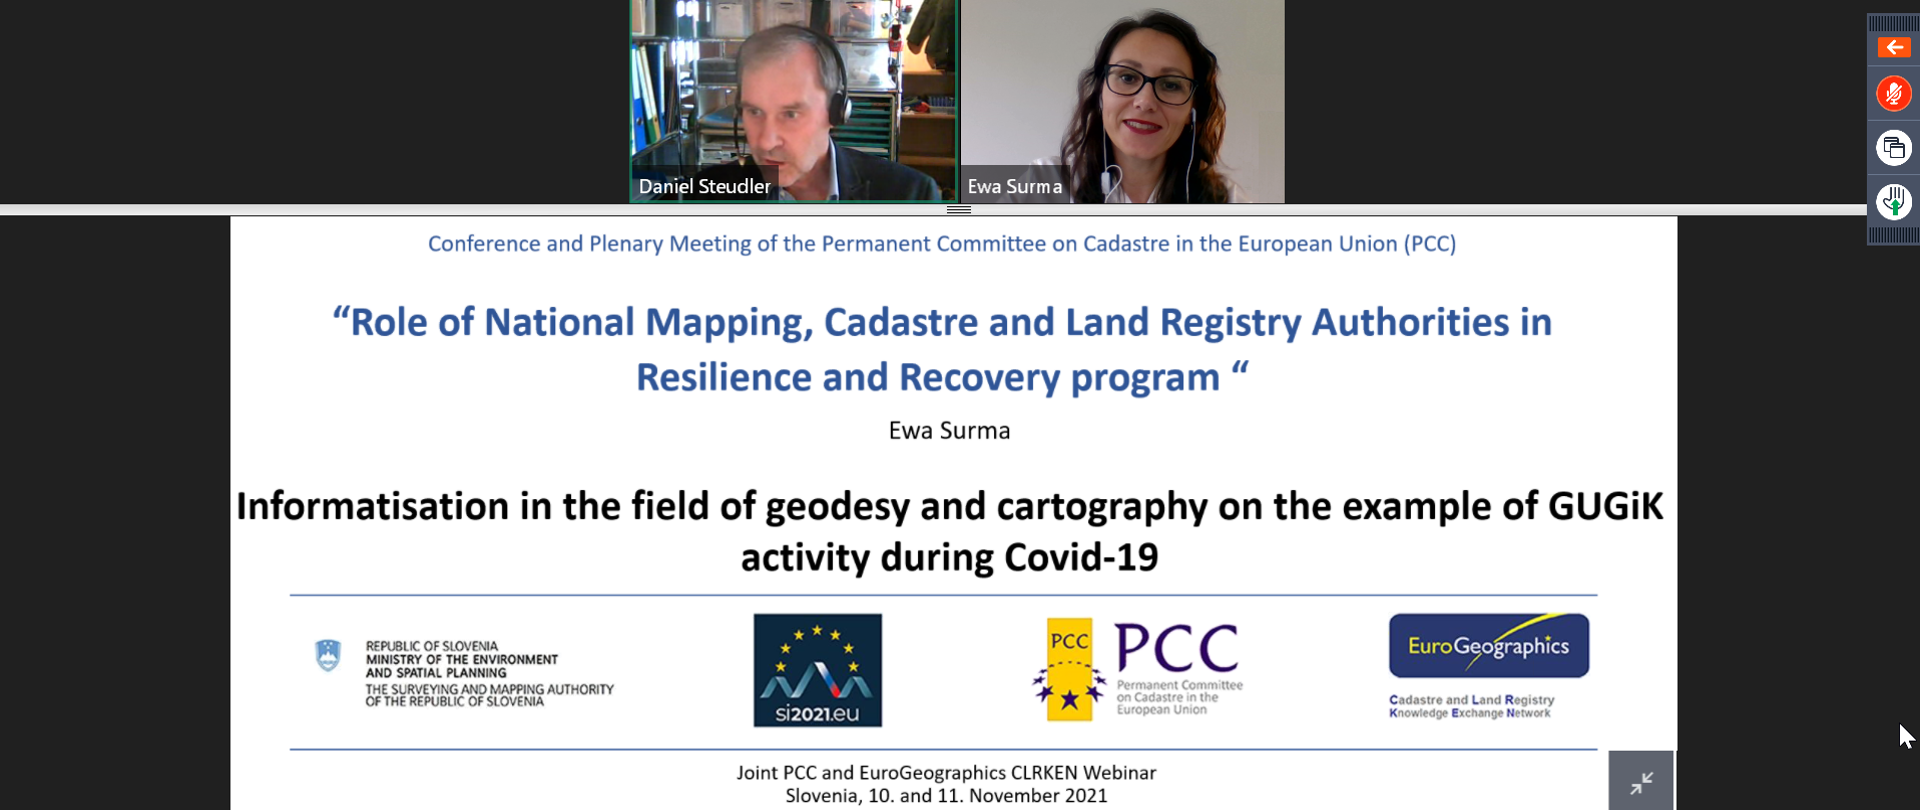 Daniel Steudler and Ewa Surma on the Permanent Committee on Cadastre(PCC) videoconference.